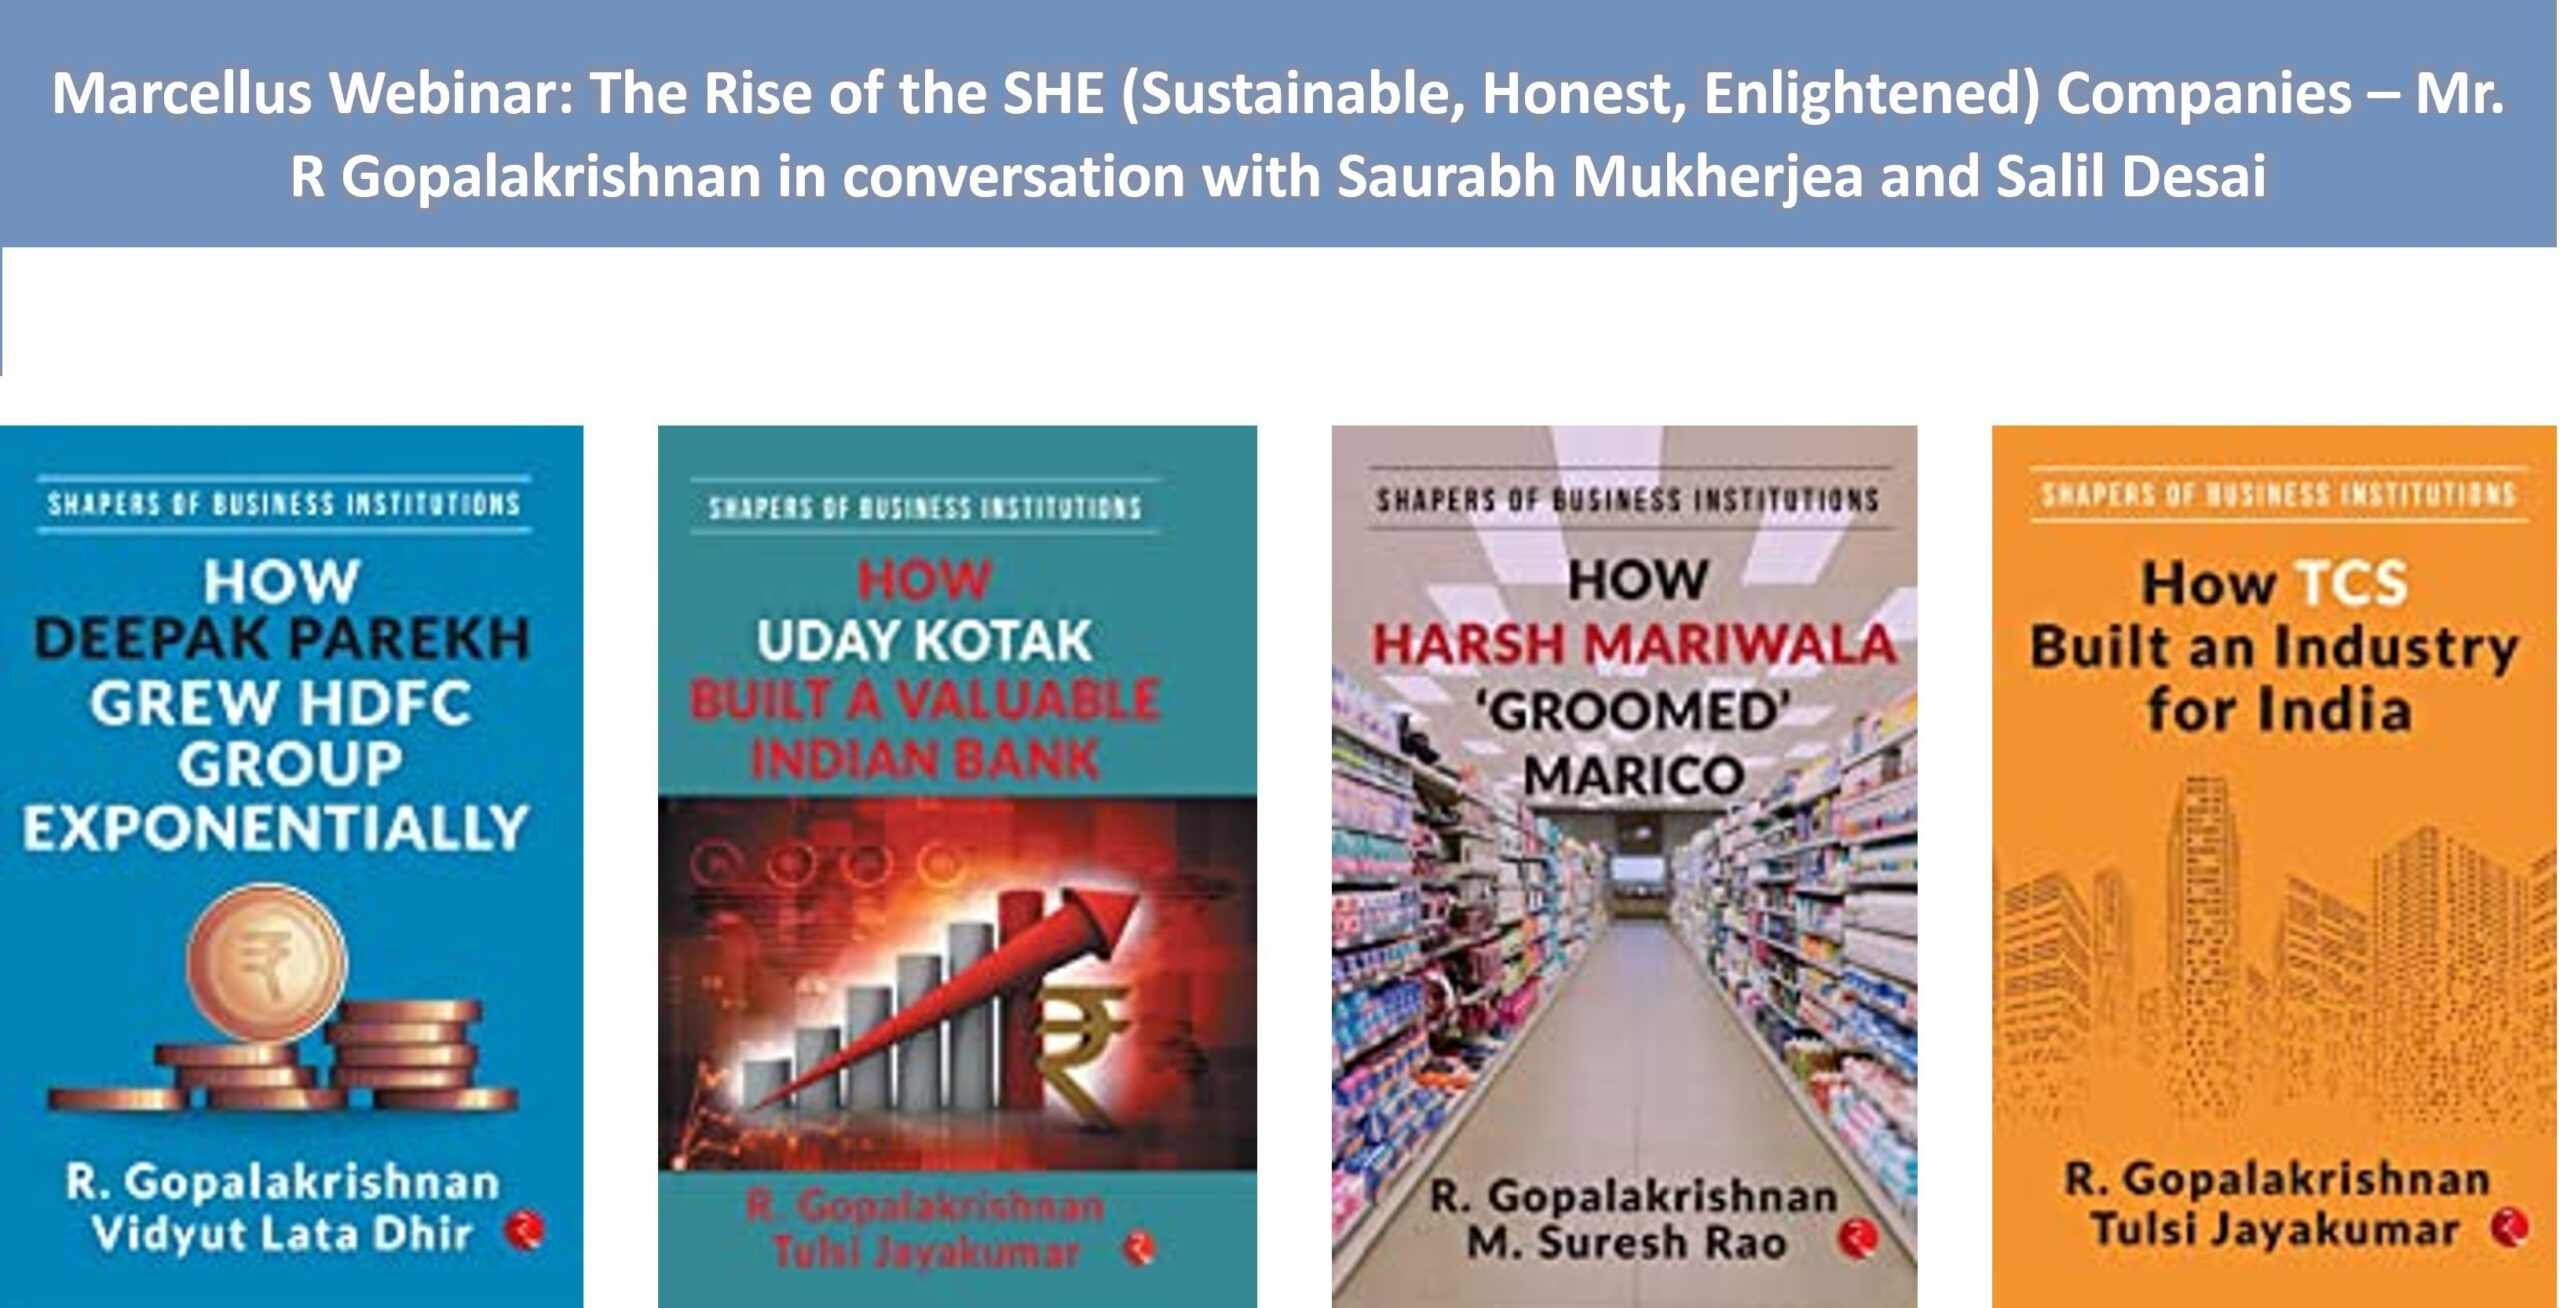 Marcellus Webinar on The Rise of the SHE (Sustainable, Honest, Enlightened) Companies between Mr. R Gopalakrishnan, Saurabh Mukherjea and Salil Desai